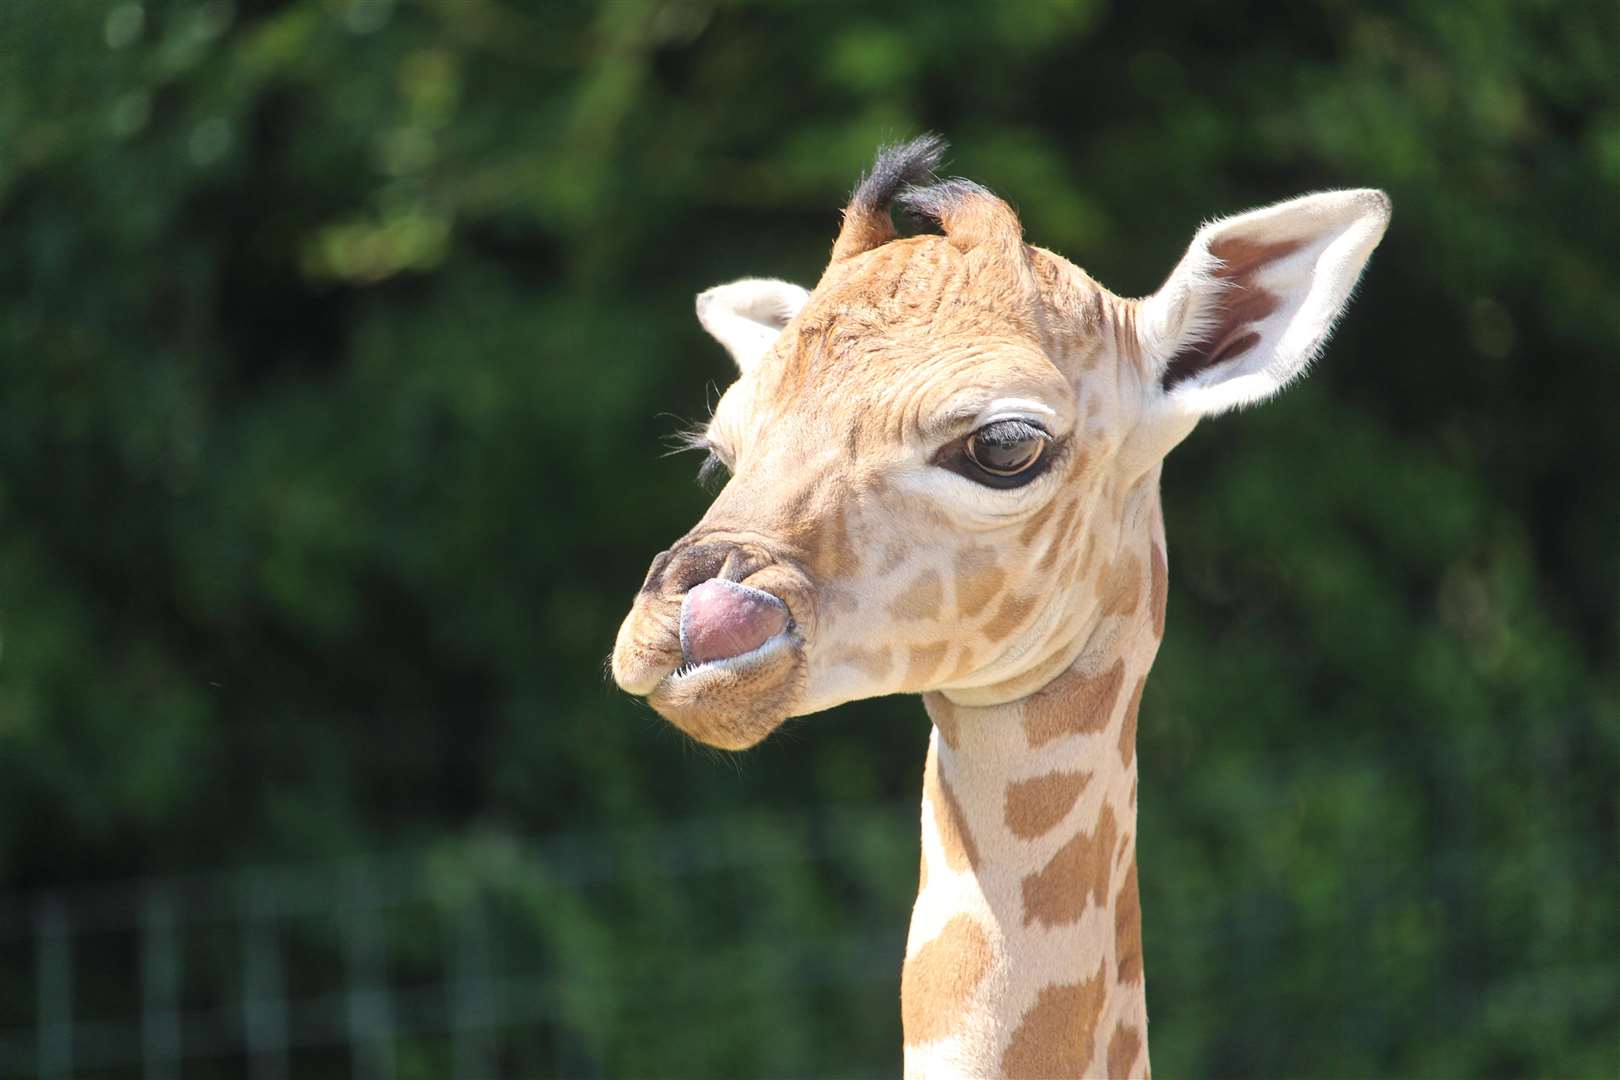 The male giraffe calf that died has been named Jabari, which means 'brave'